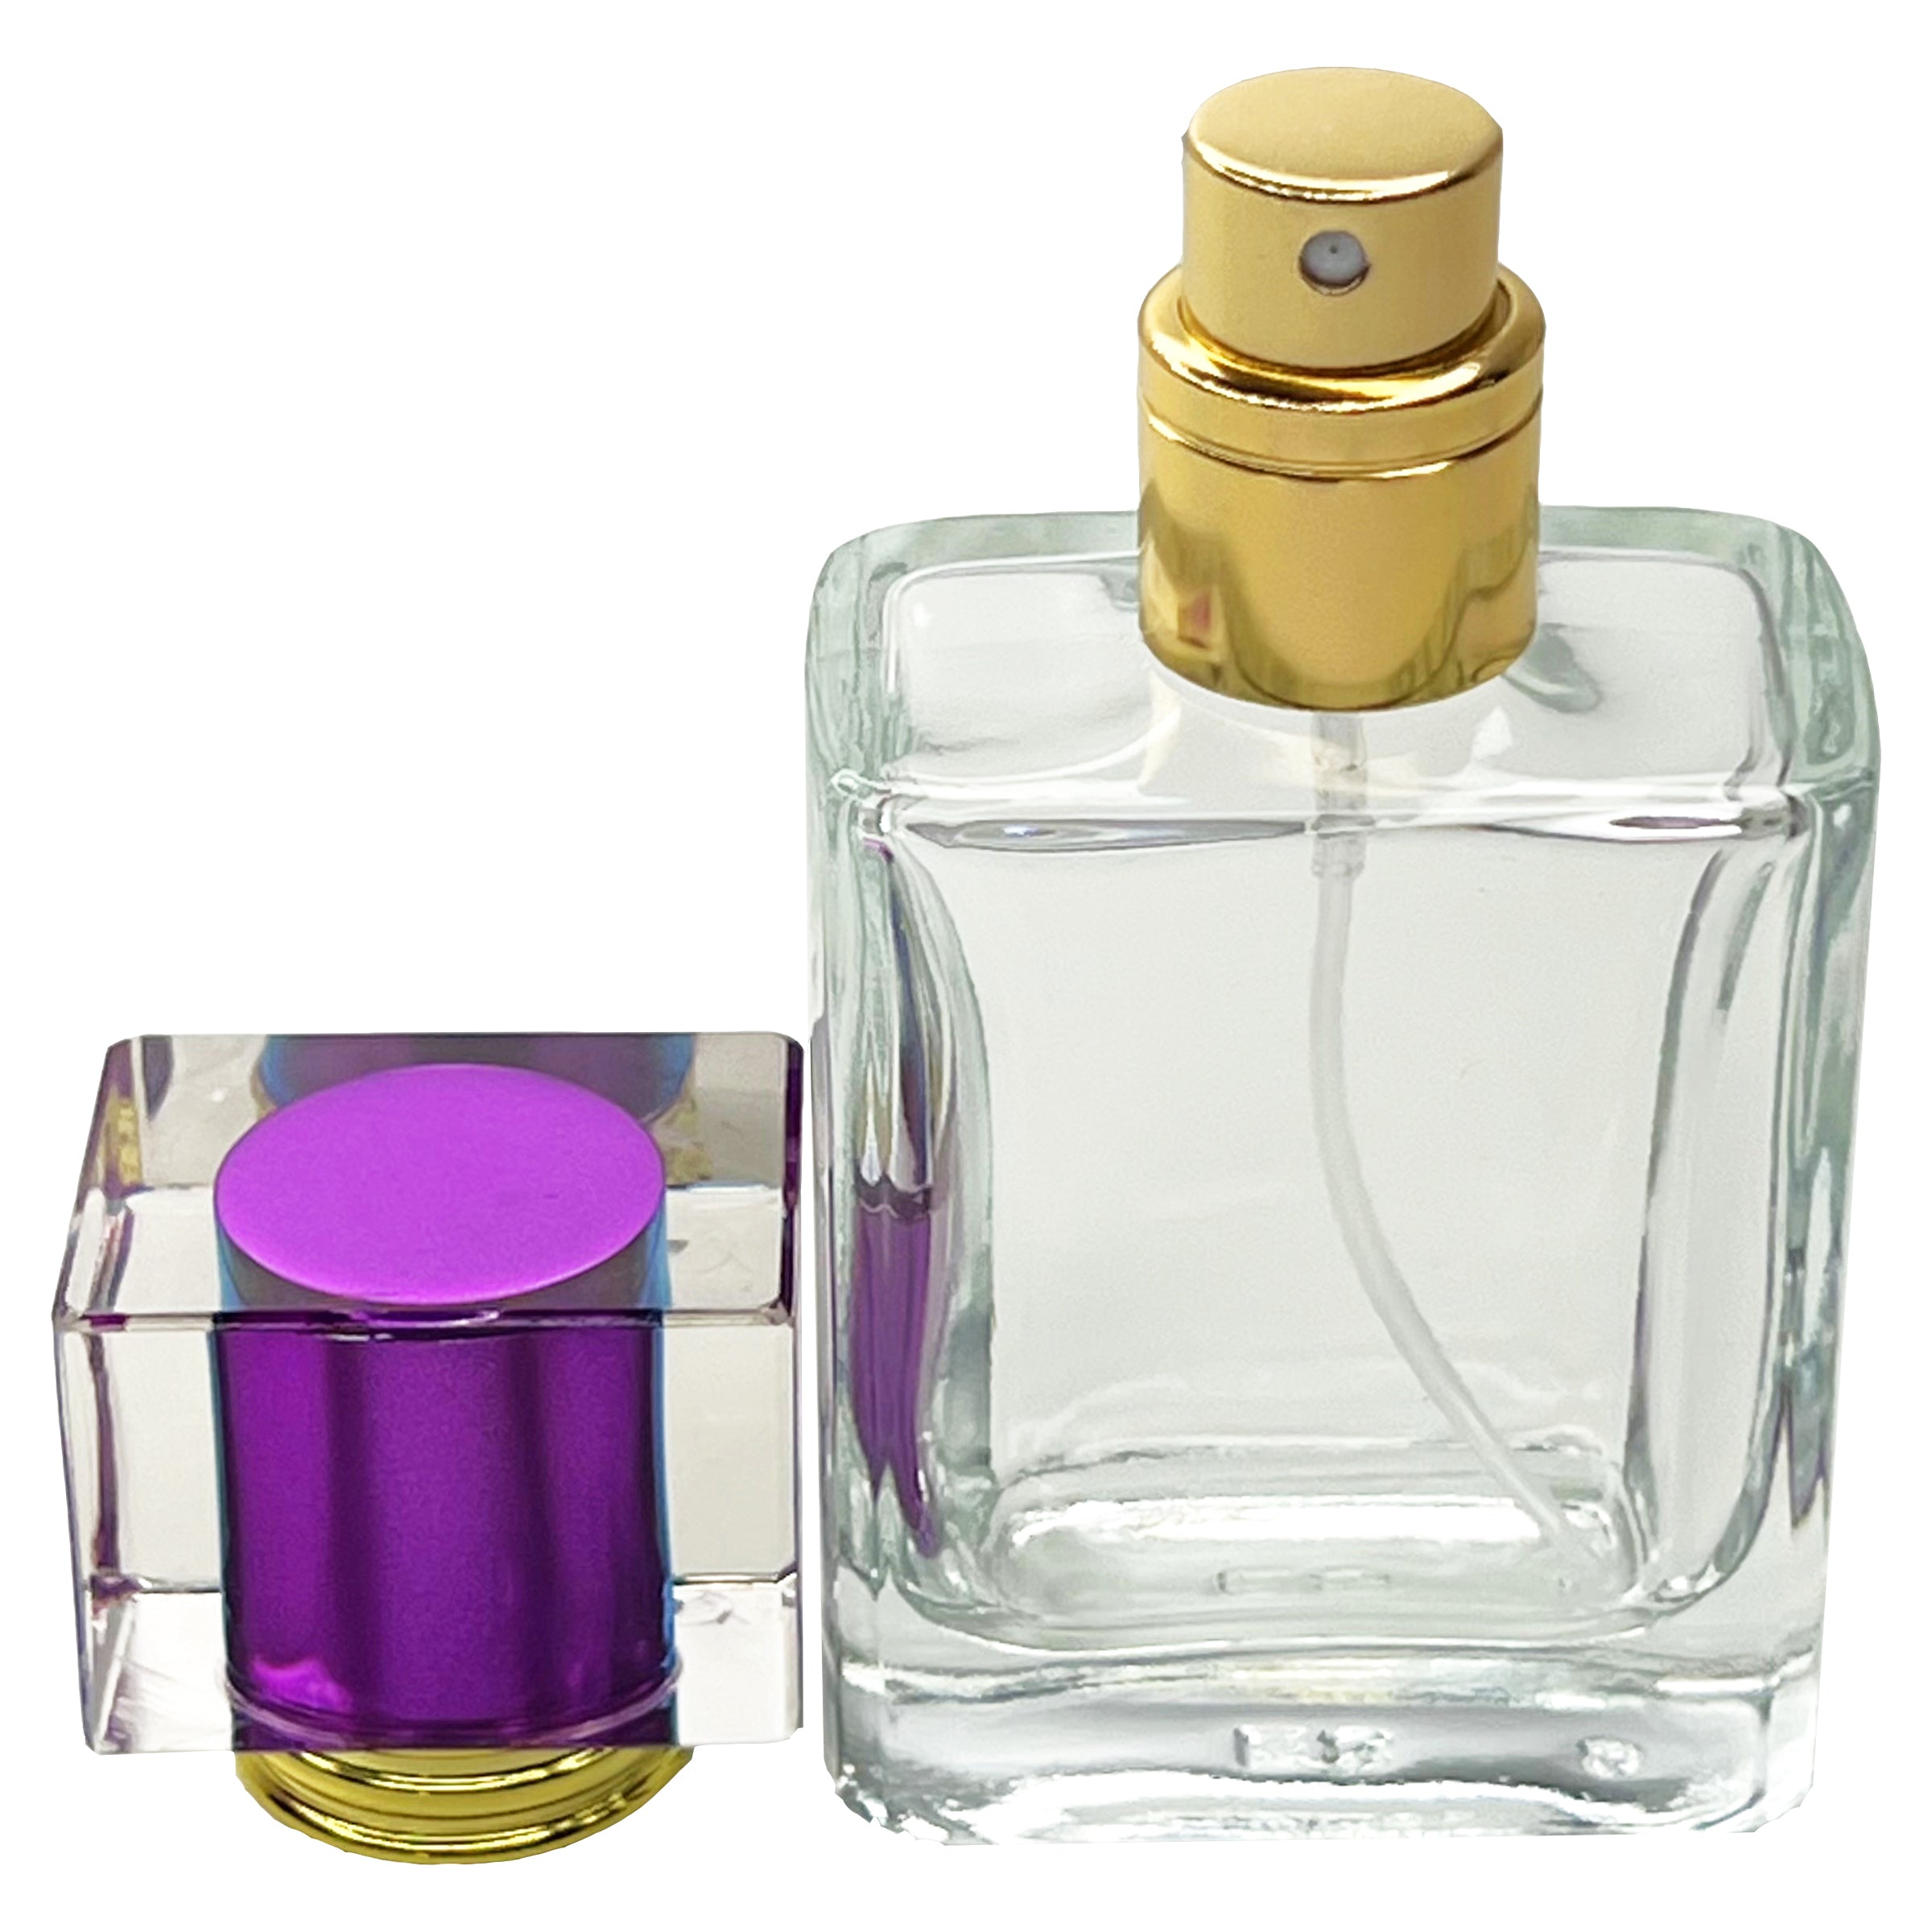 30ml 1oz clear square 6 colors perfume glass spray bottles